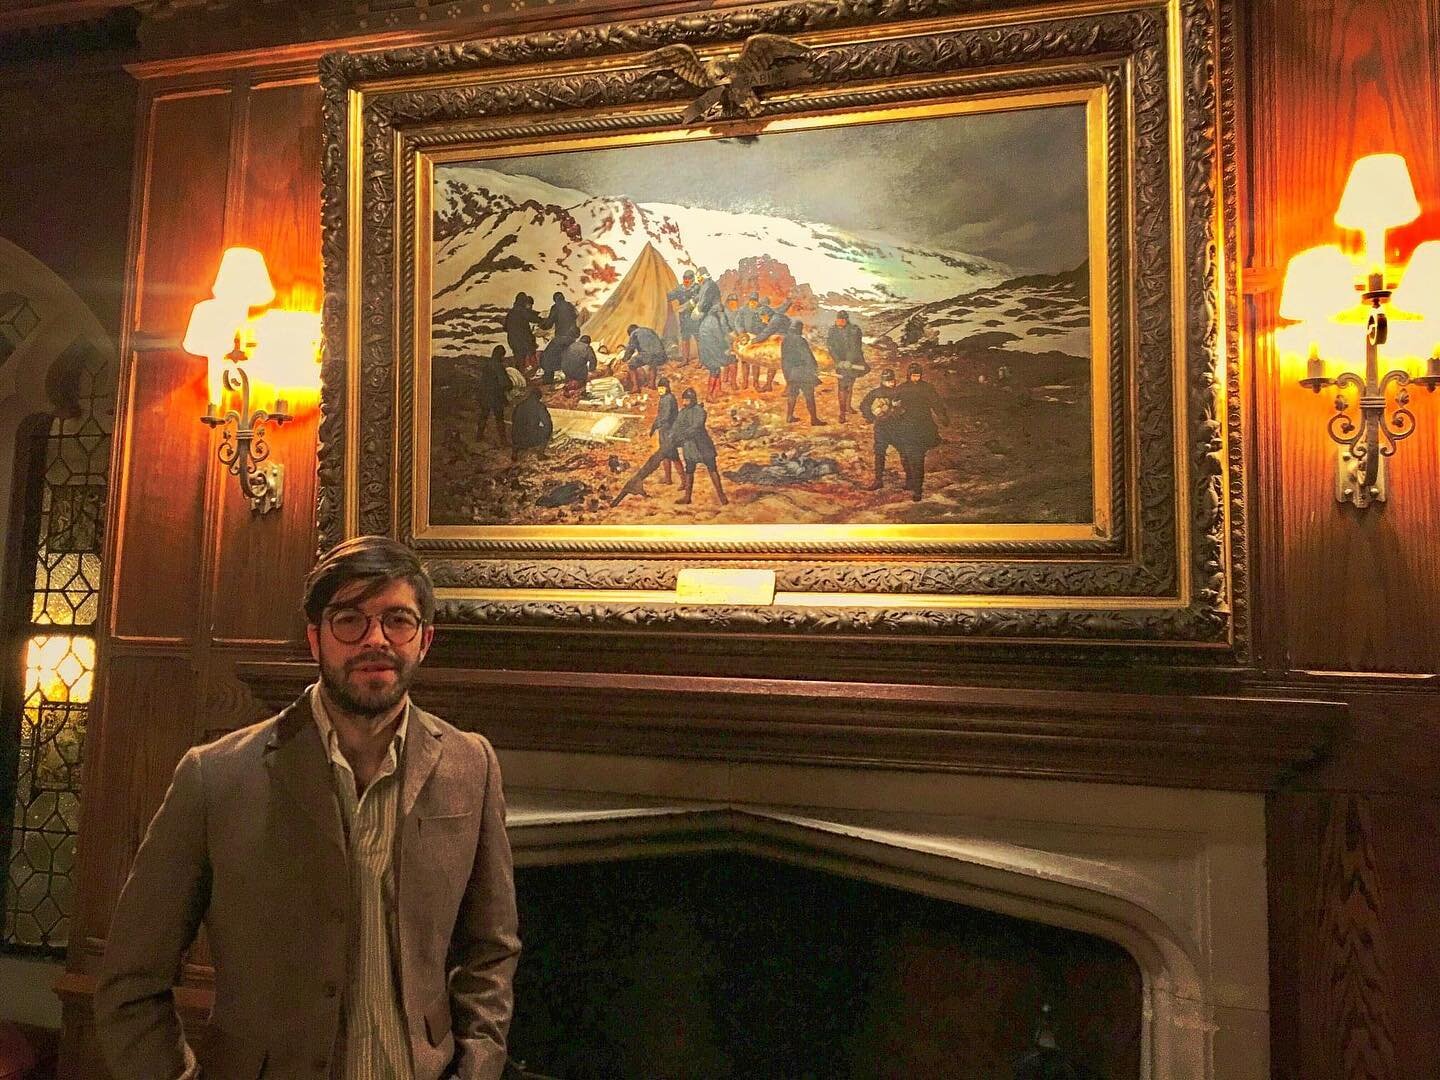 Behind me is the portrait of Major General A. W. Greely&rsquo;s rescue at Cape Clay in 1884. 

Dynamic and extraordinary characters in extraordinary circumstances motivate much of my narrative work.

I&rsquo;ve noticed my own life begins to mold arou